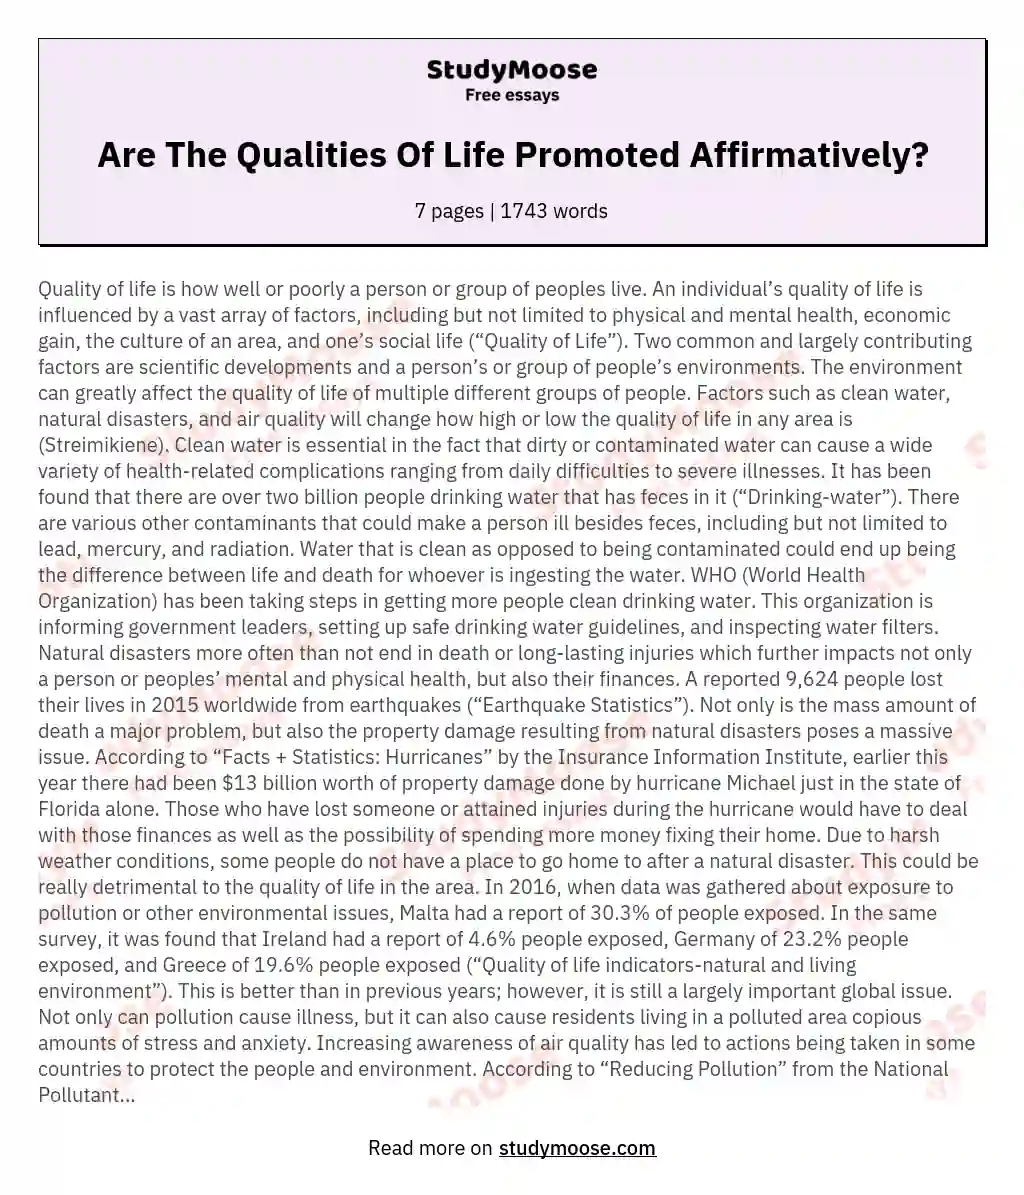 Are The Qualities Of Life Promoted Affirmatively? essay